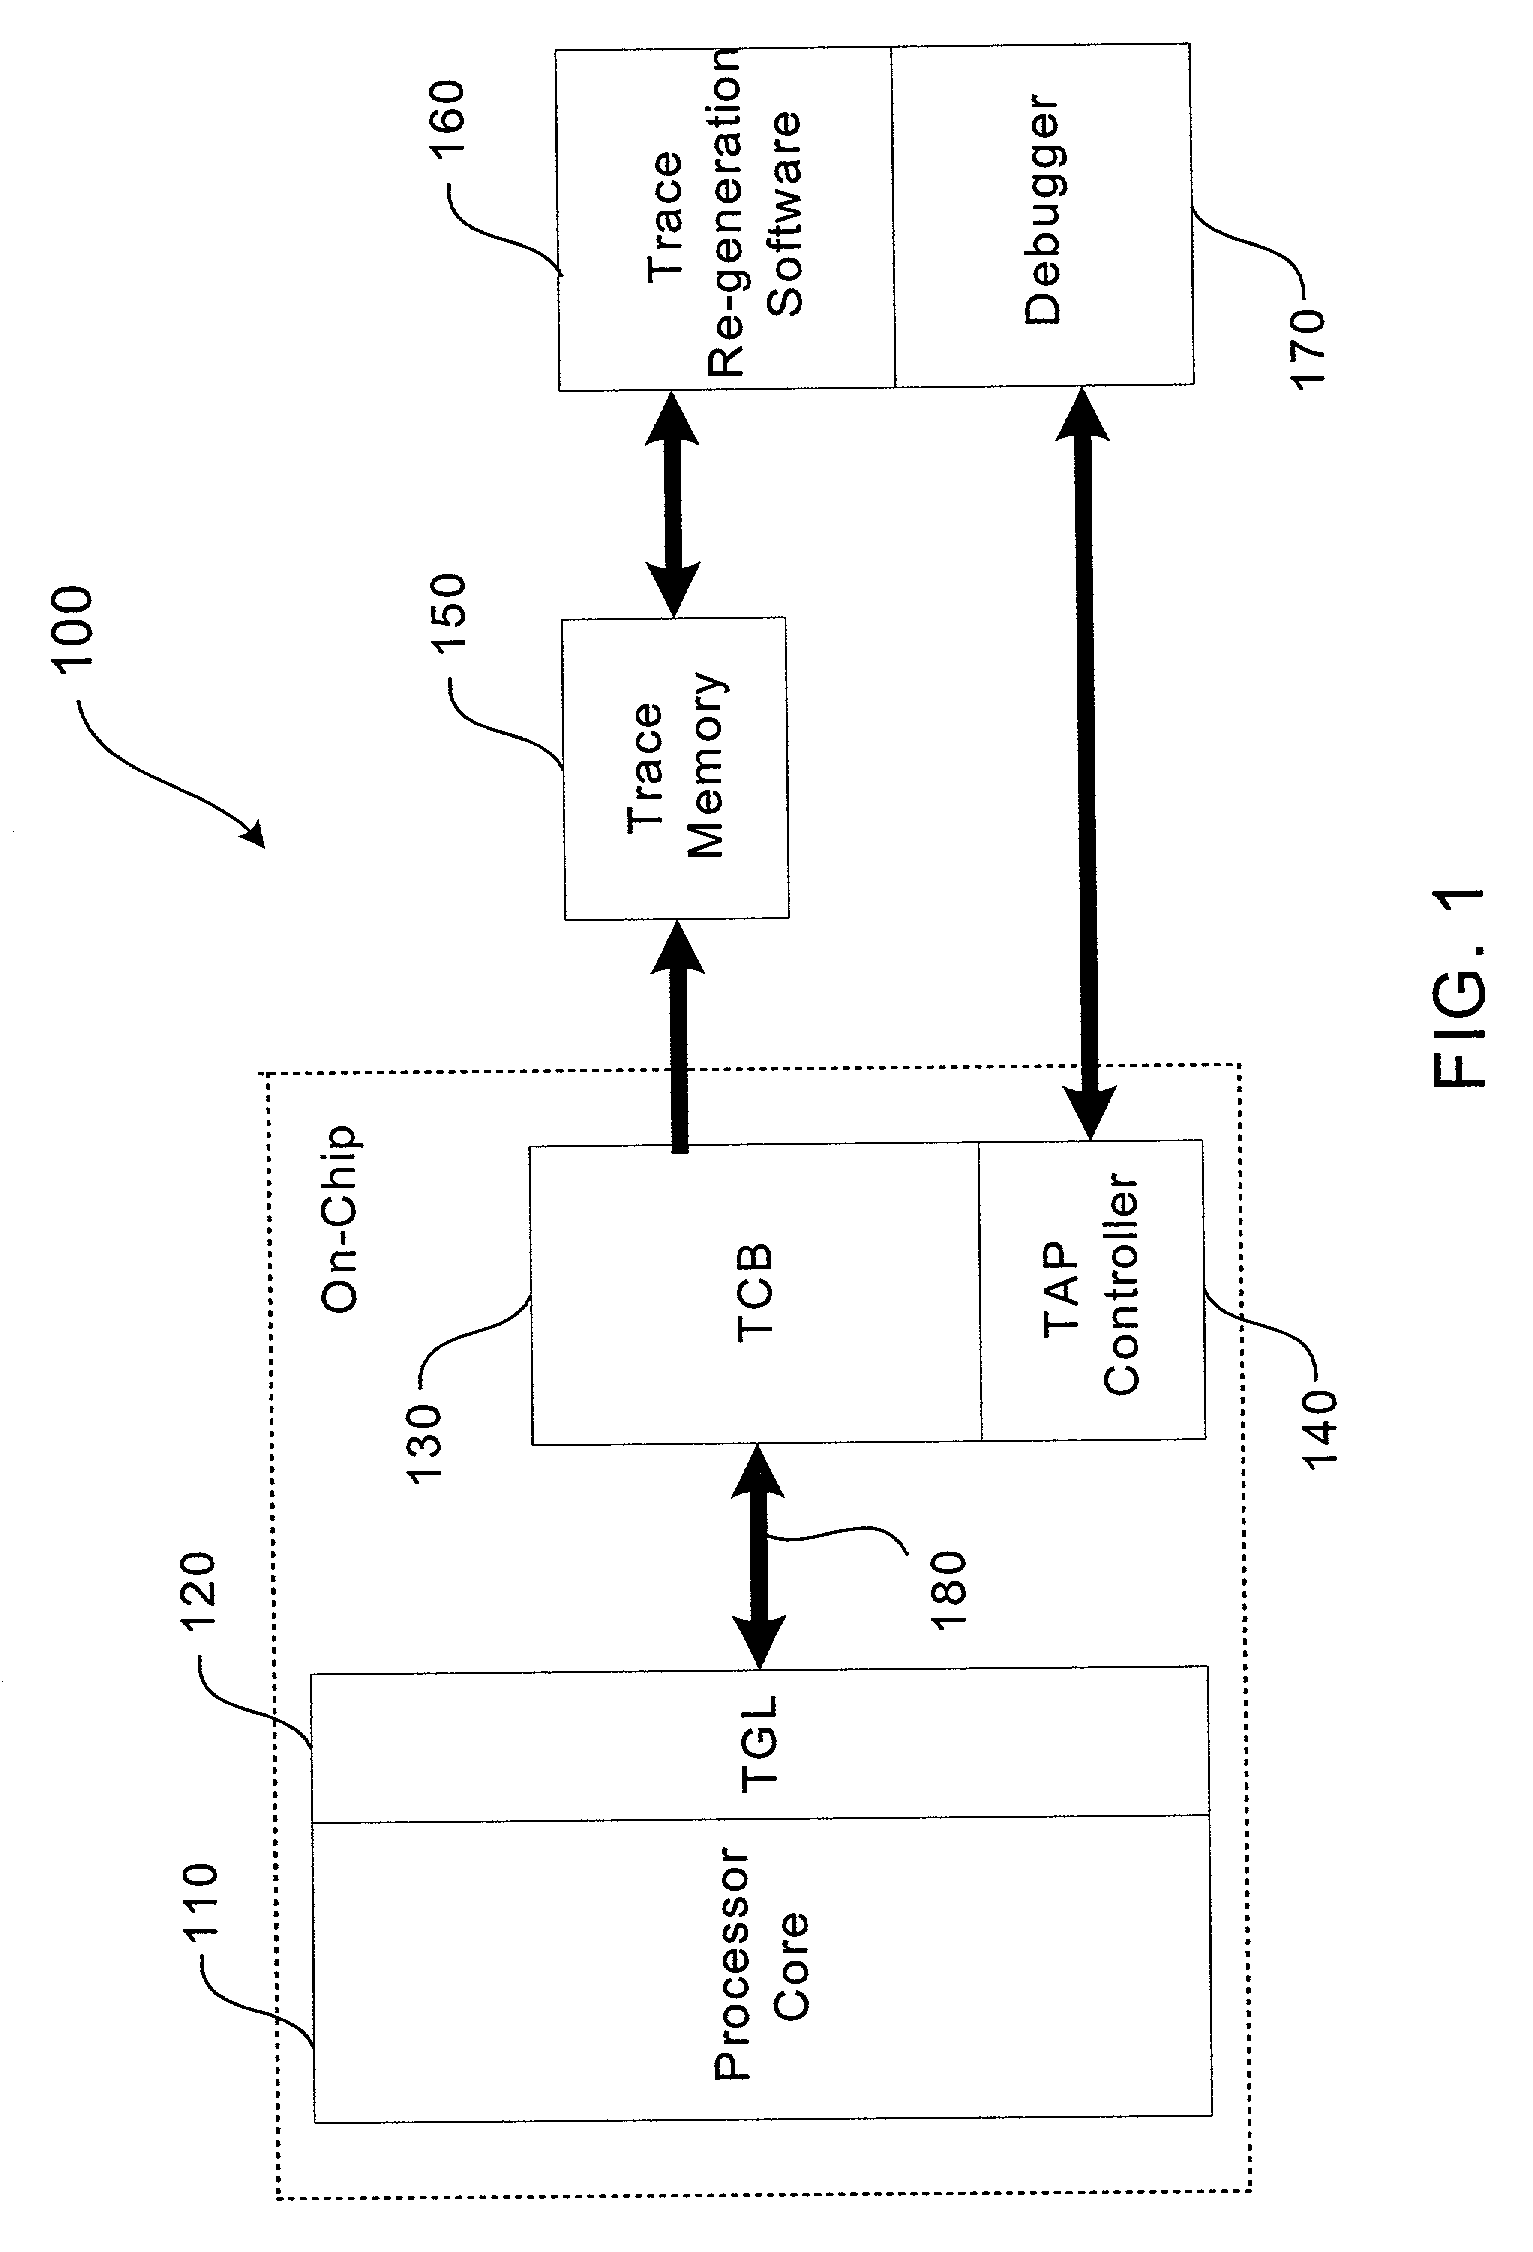 Trace control based on a characteristic of a processor's operating state